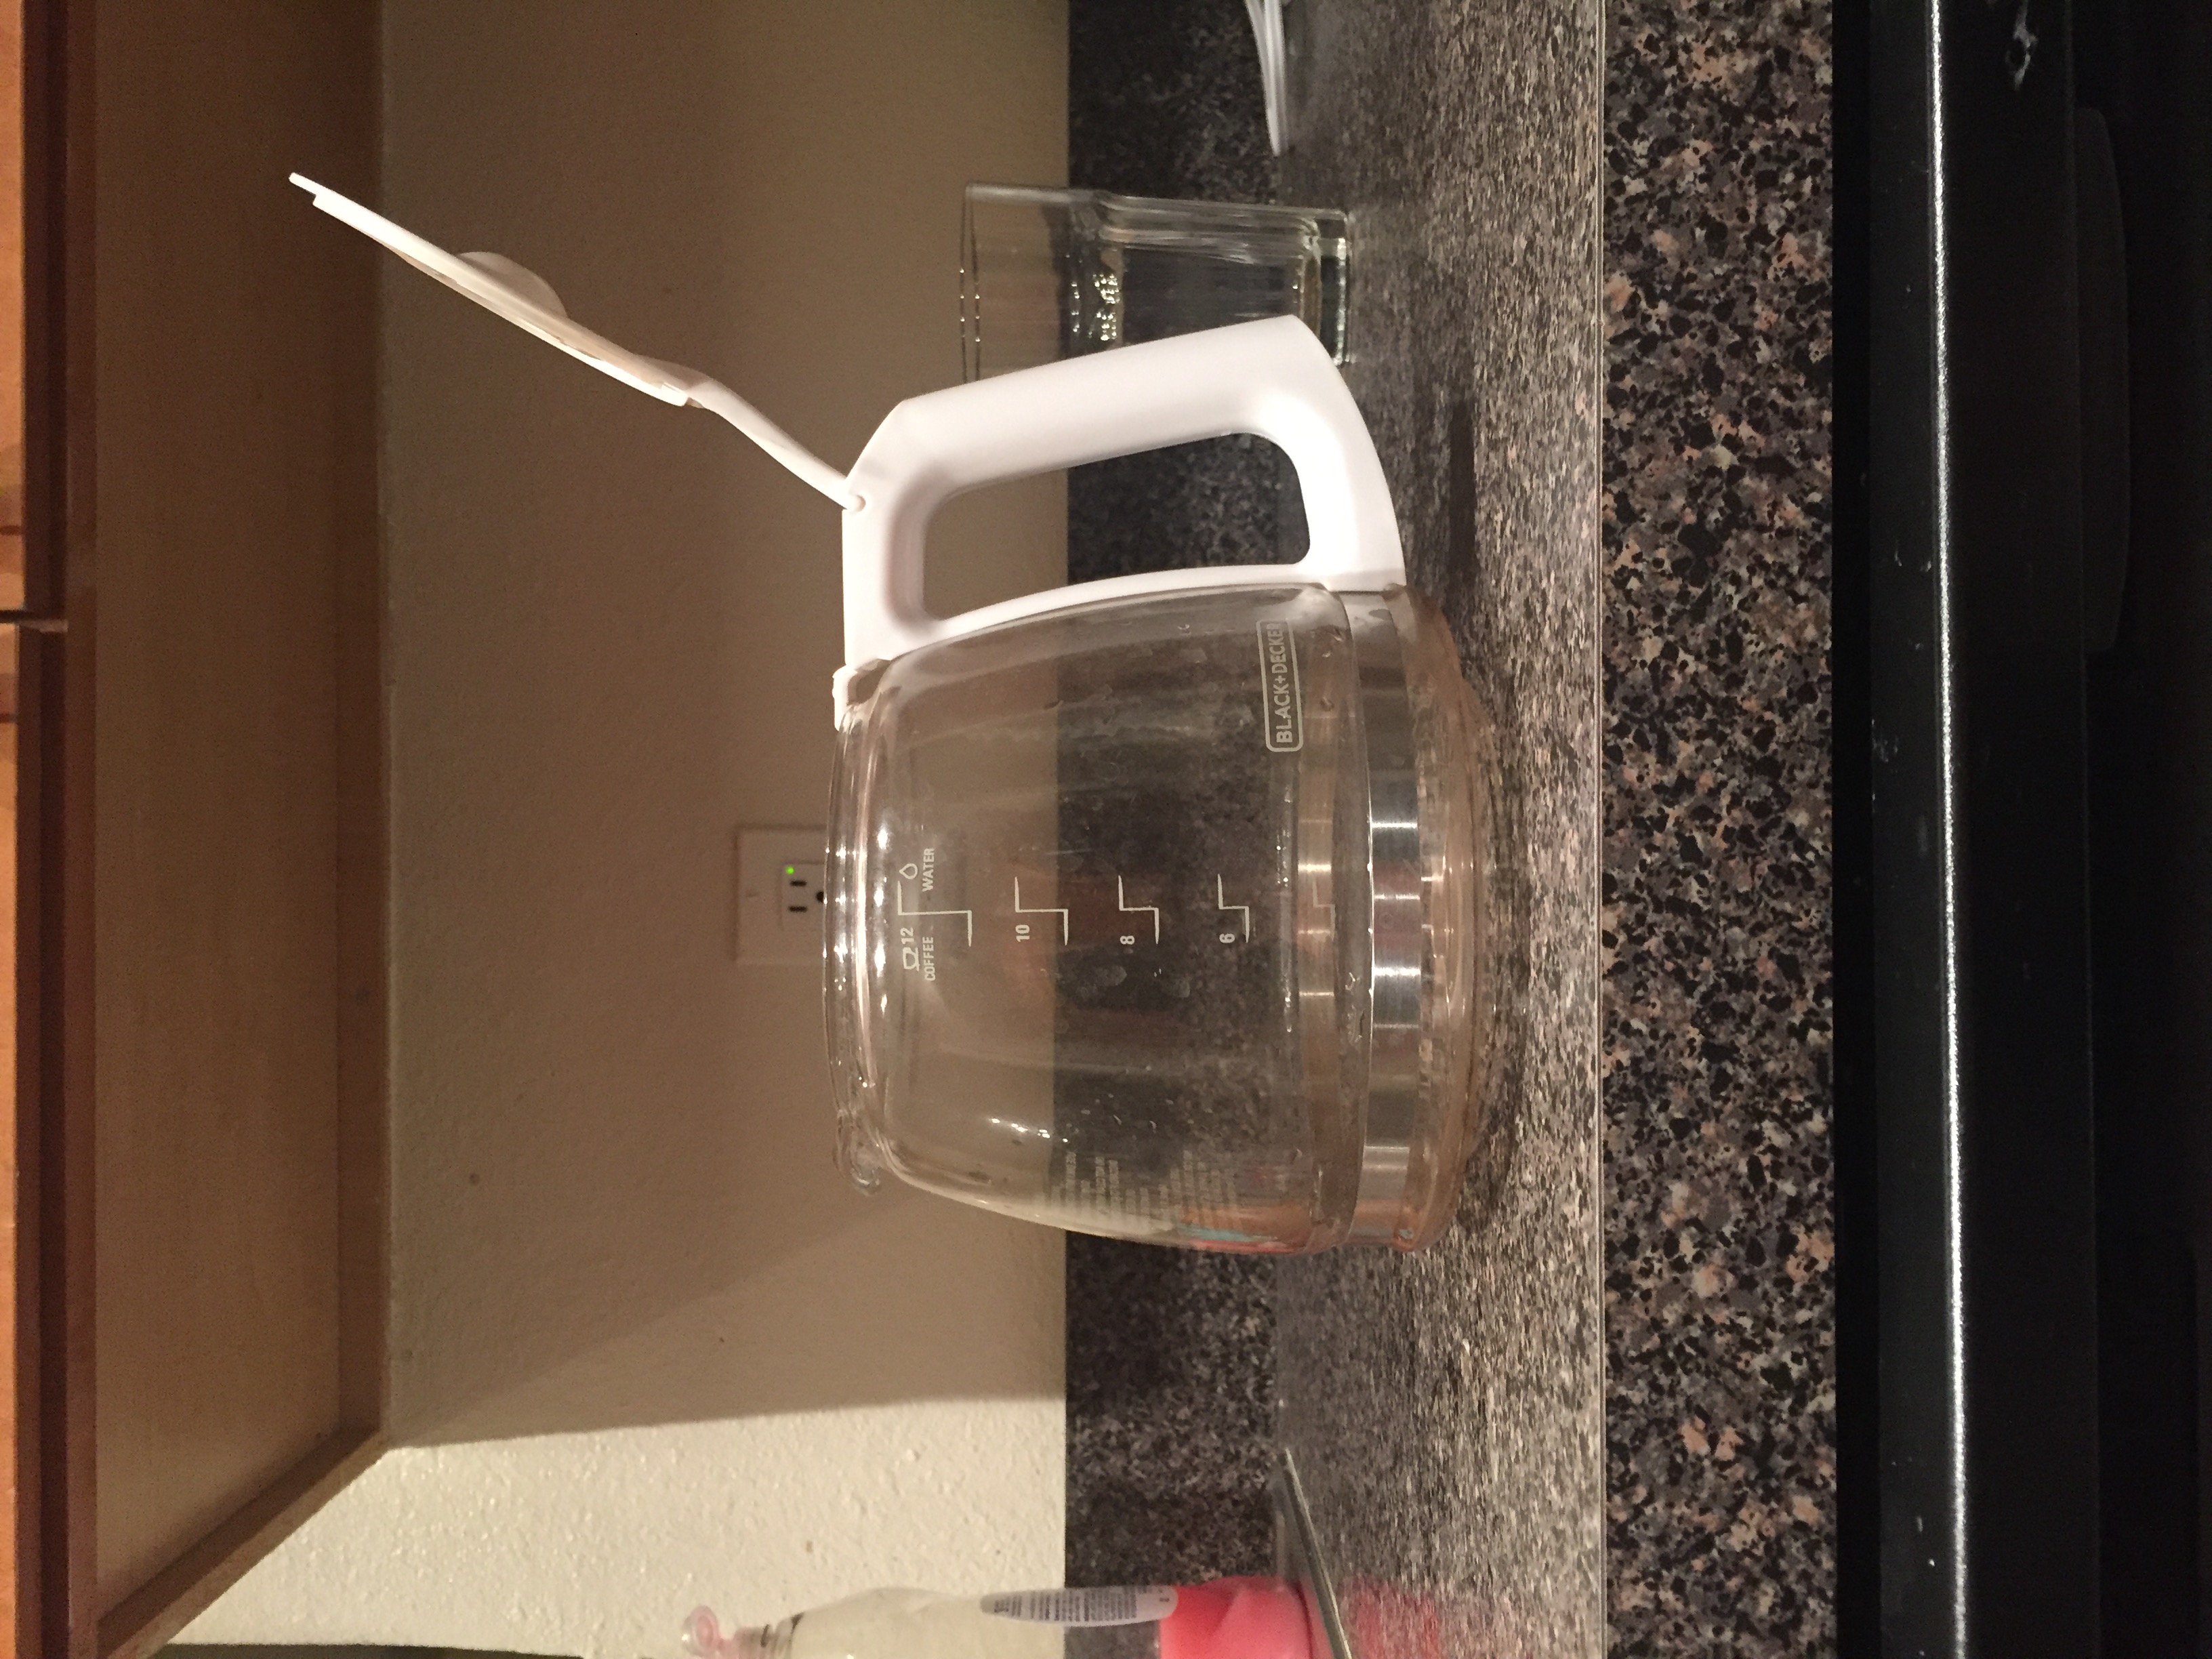 Finding an Equation Between the Pouring Angle and Volume Regarding to the Coffee Pot